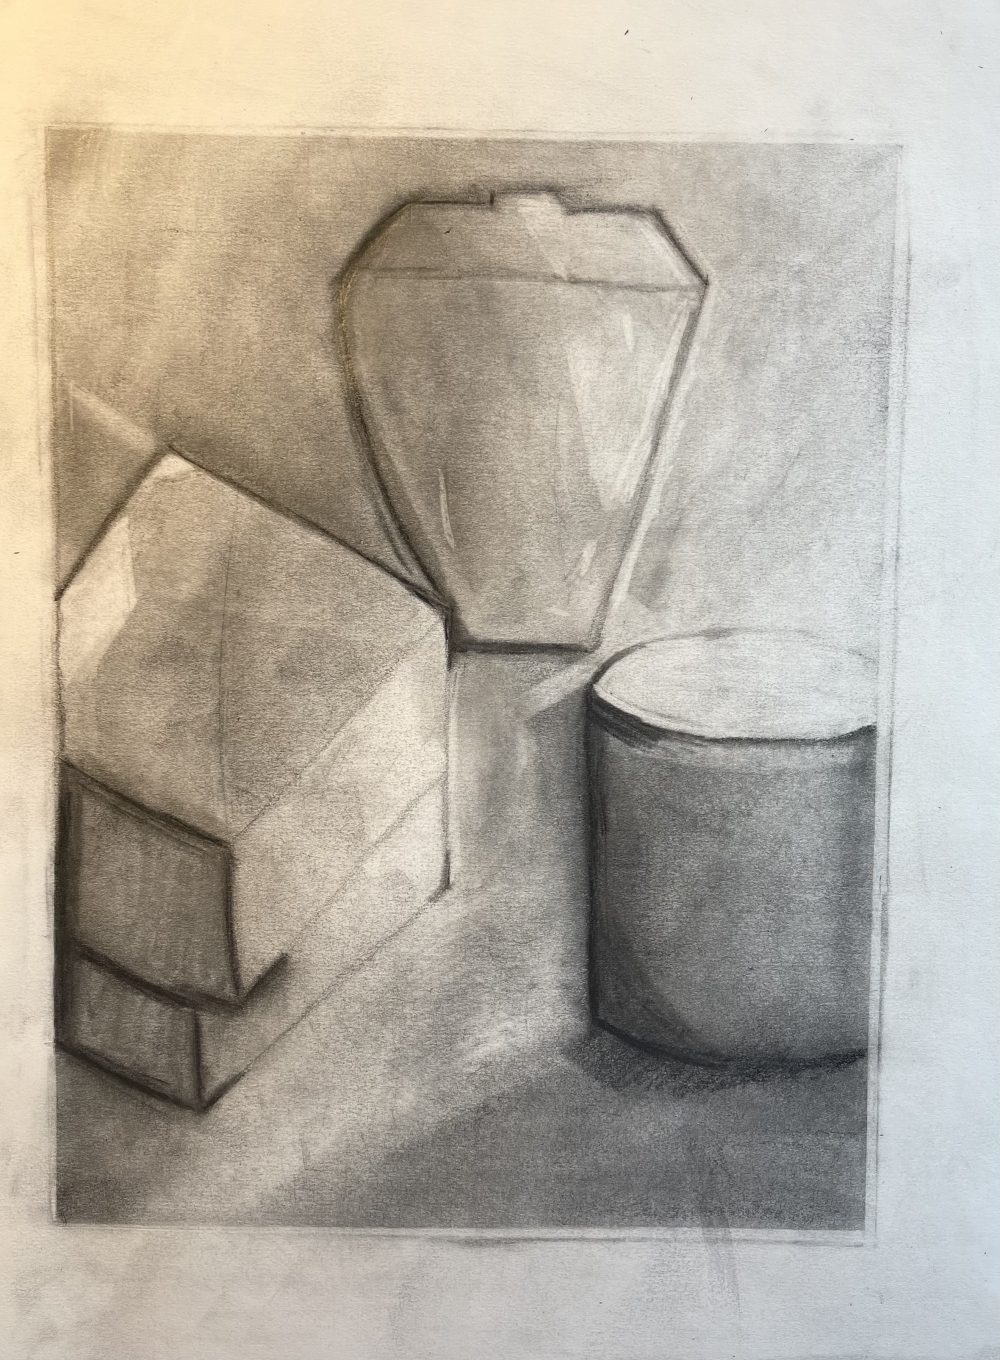 A drawing with between values of black and white of four objects including a cup, two boxes and a pot. The boxes and pot are in the foreground, while the cup is in the background.